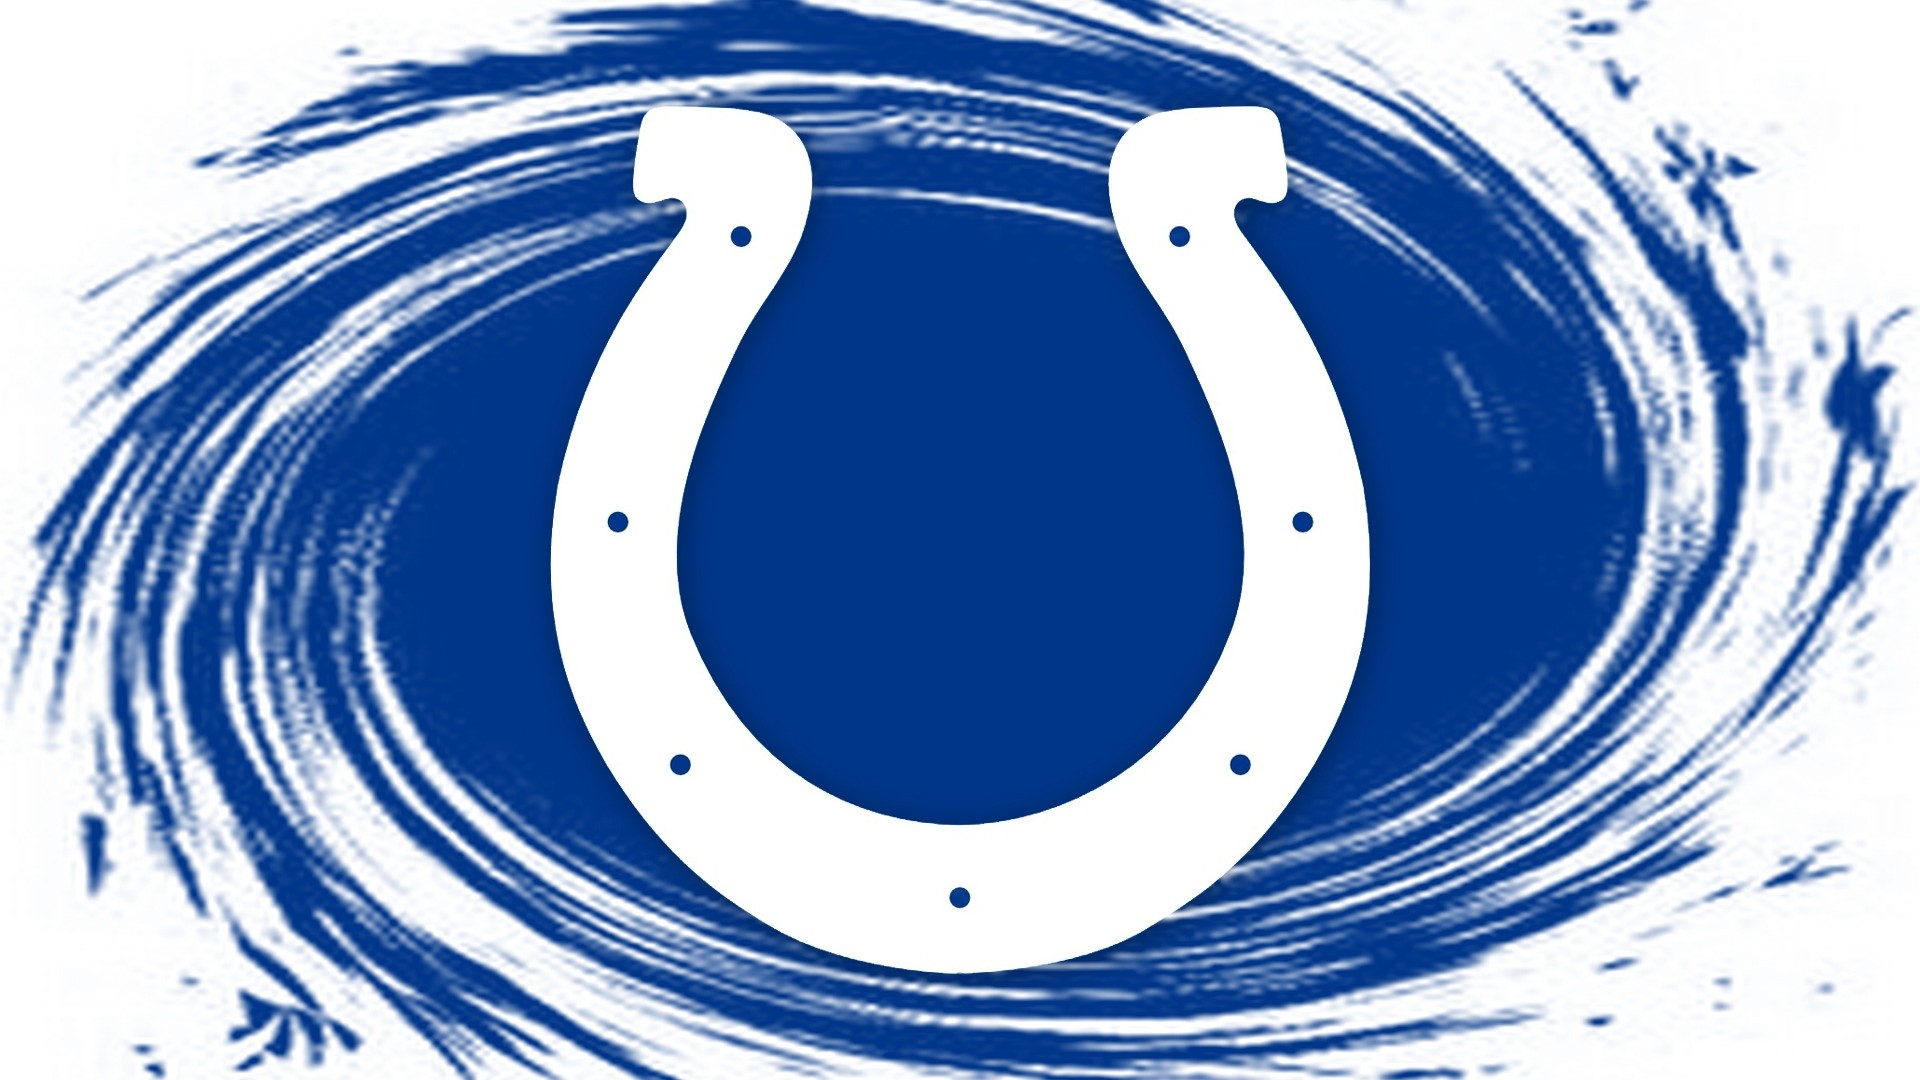 HD Backgrounds Indianapolis Colts 1920x1080